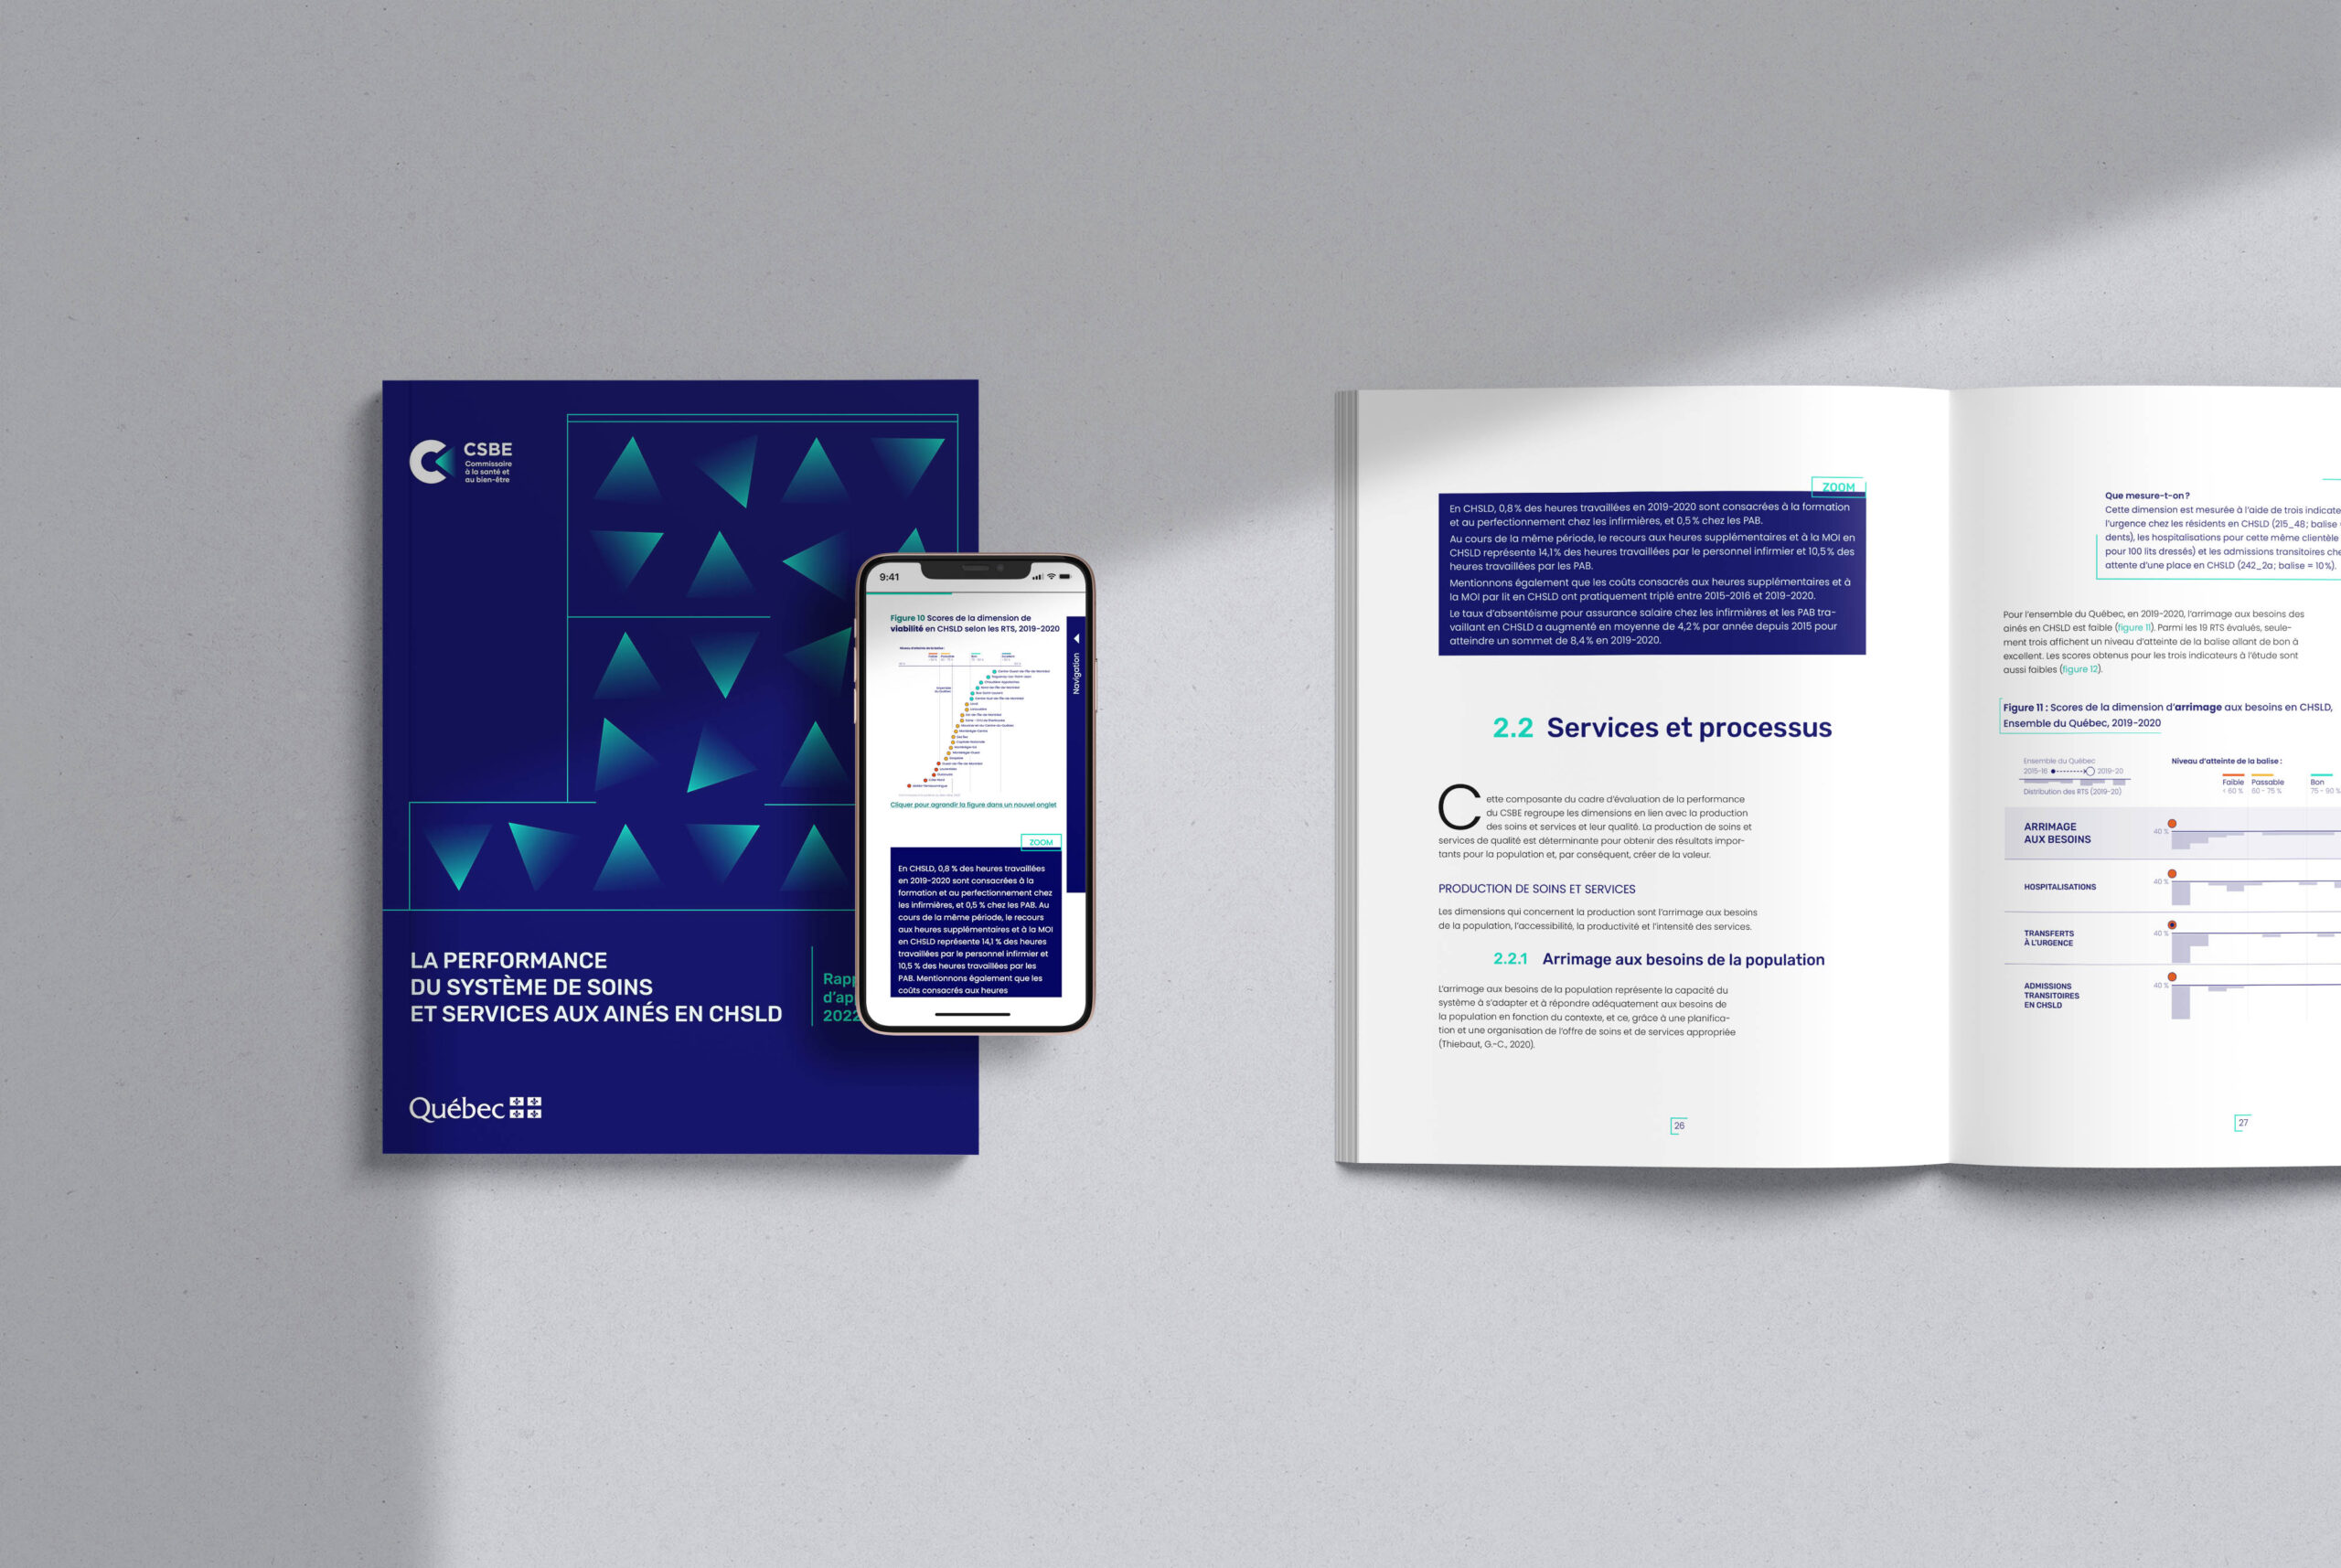 Cover and double page spread of the report "La performance du système de soins et services aux aînés en CHSLD" as well as a cell phone displaying a graphic from the report.